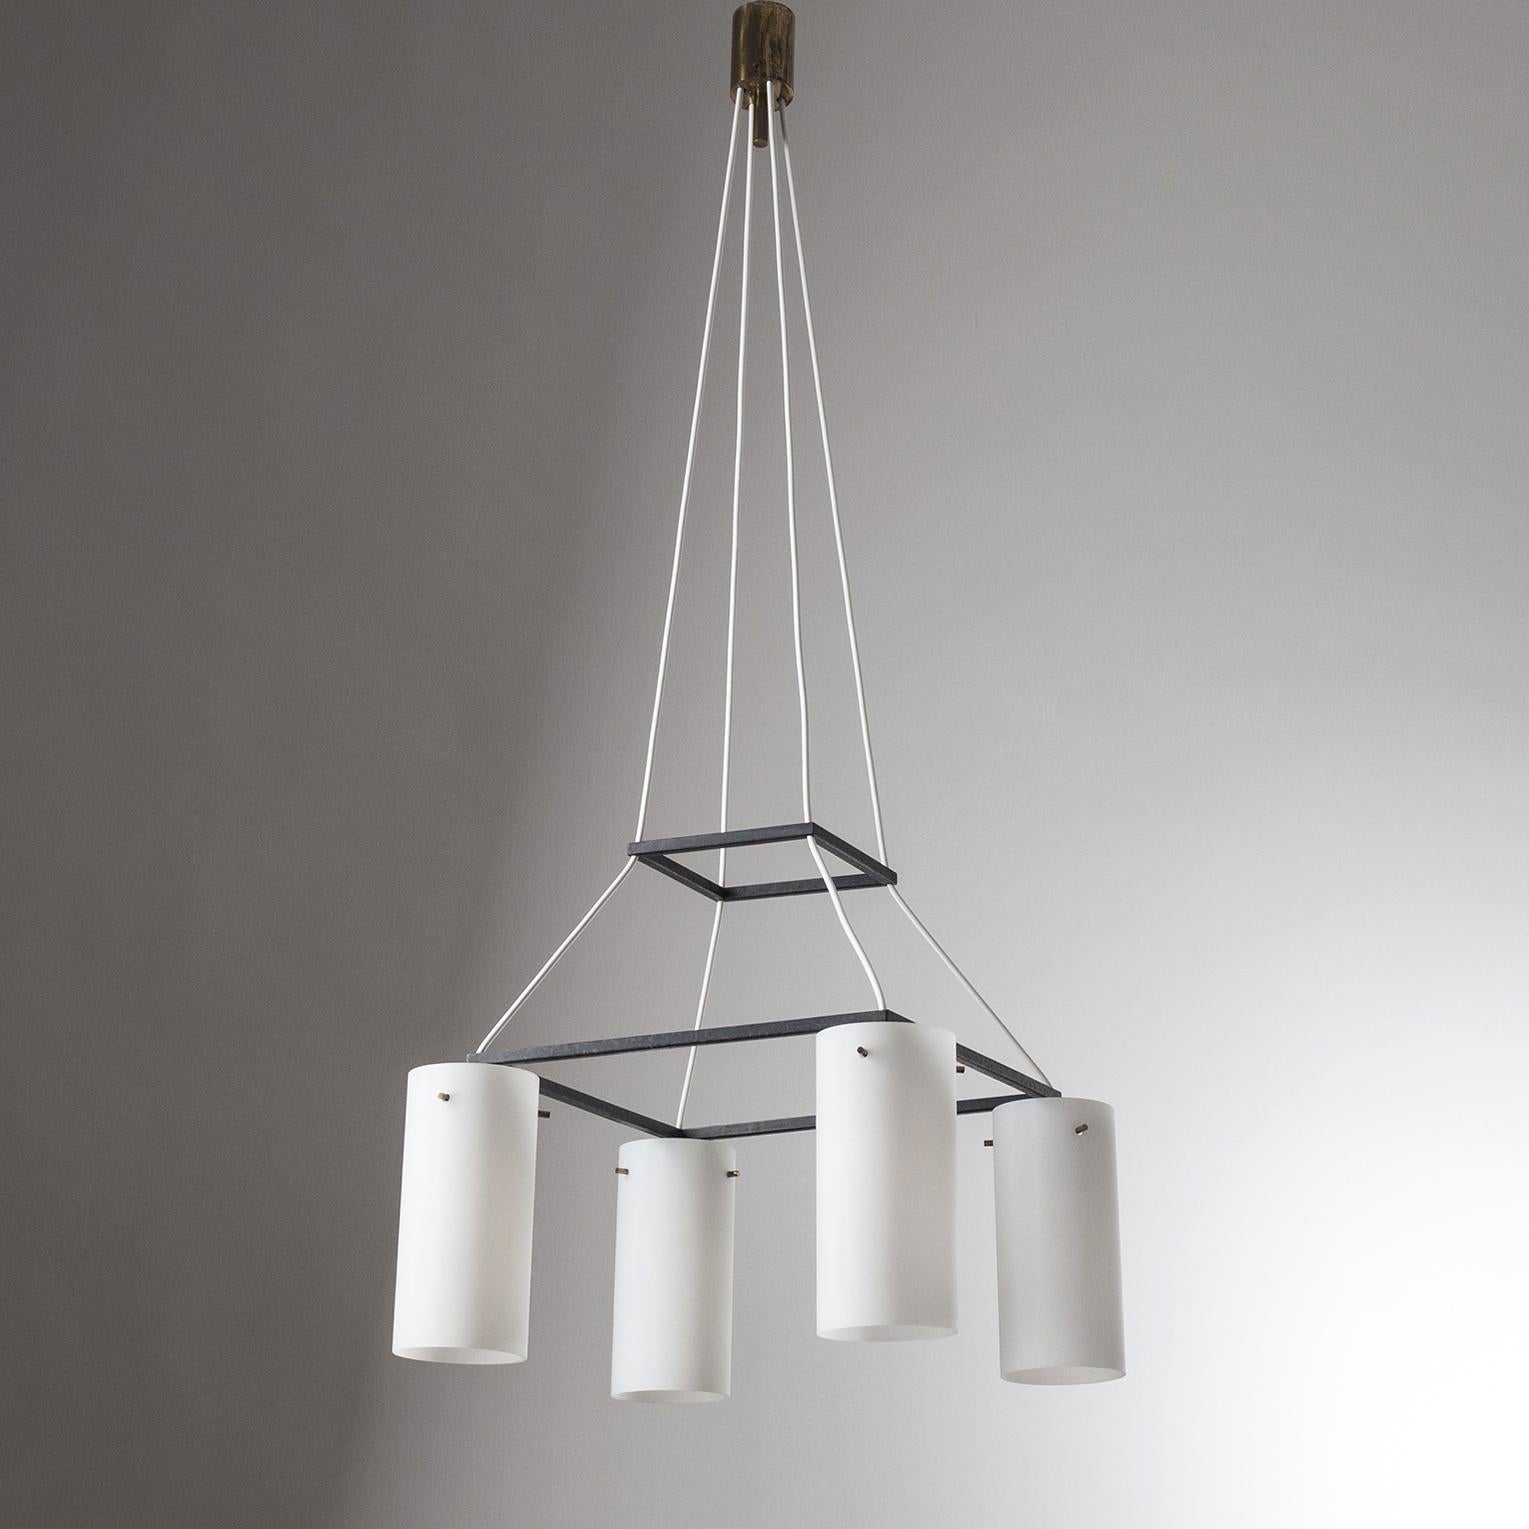 Rare Italian modernist suspension chandelier from the 1950s, attributed to Stilnovo. Four satin glass diffusers hang from a black lacquered square frame with a smaller square floating above (position adjustable). Original brass E27 sockets with new